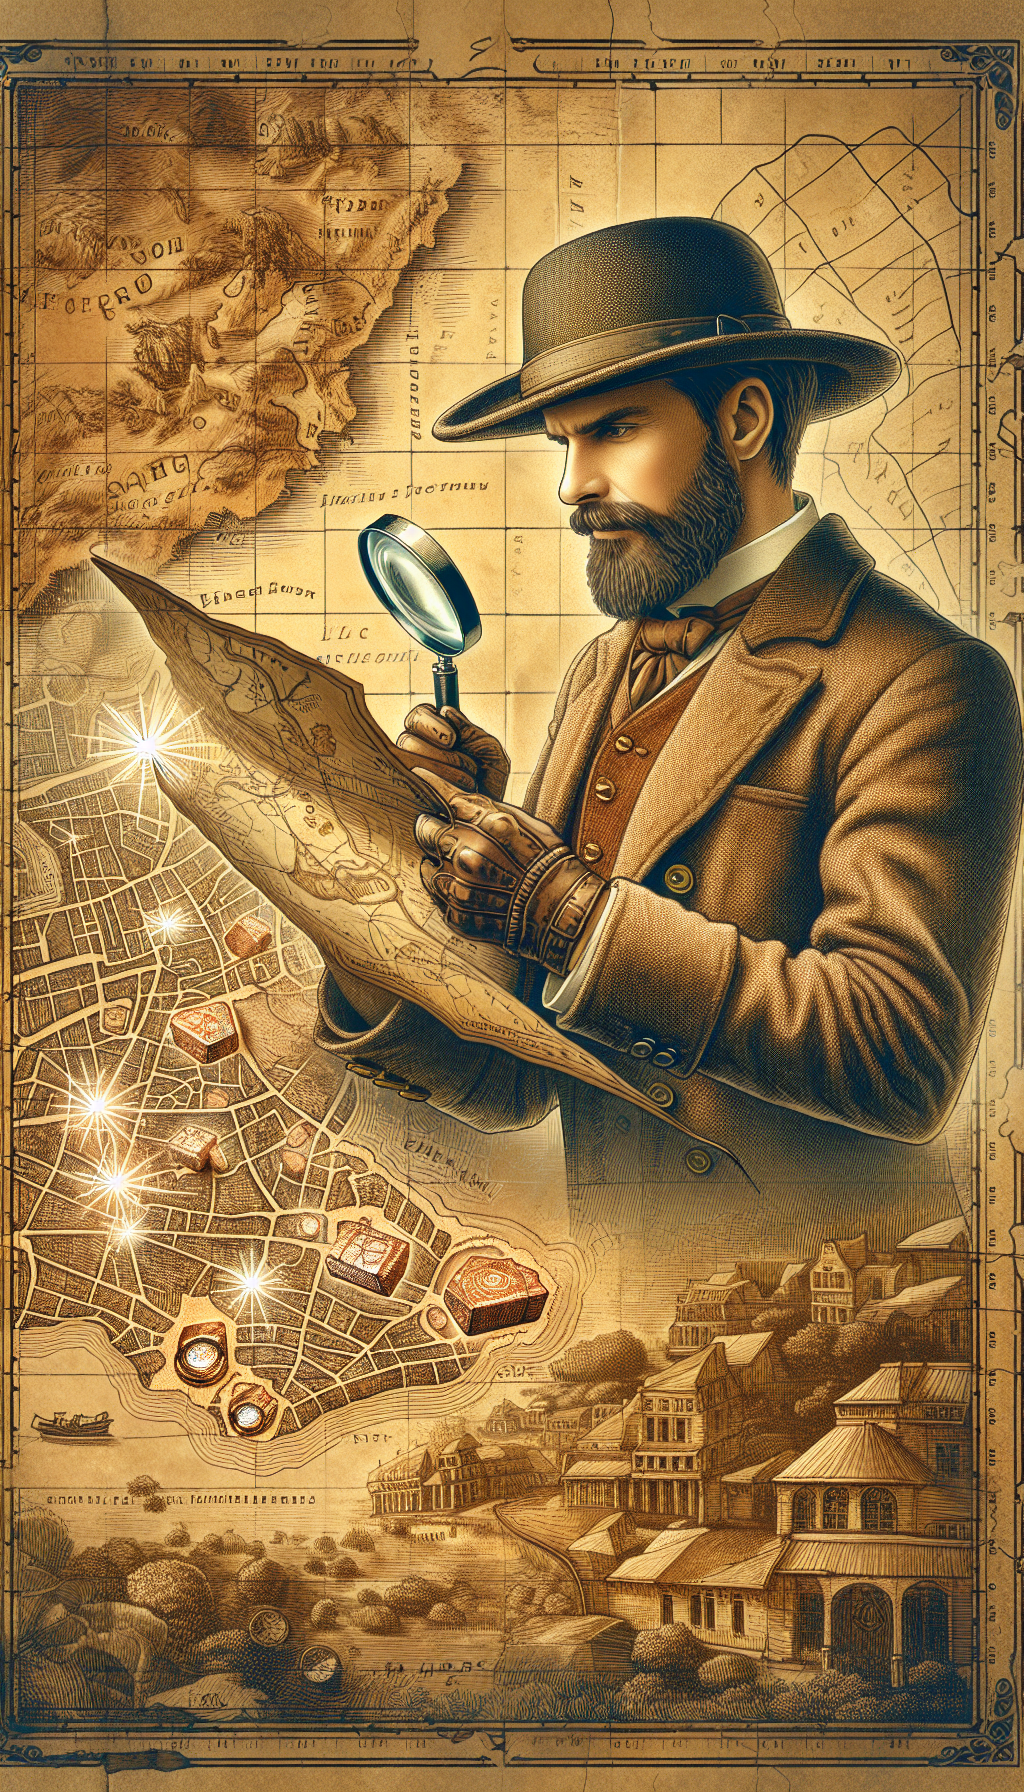 An intrepid explorer in vintage attire examines an ancient map with a magnifying glass, revealing hidden paths to a trove of glowing, precious bricks nestled in ruins and antique markets. The intricate map details landmarks, with brick illustrations as treasures marked by a shimmering "X," symbolizing the hunt for valuable antique bricks in a whimsical, sepia-toned ink style.